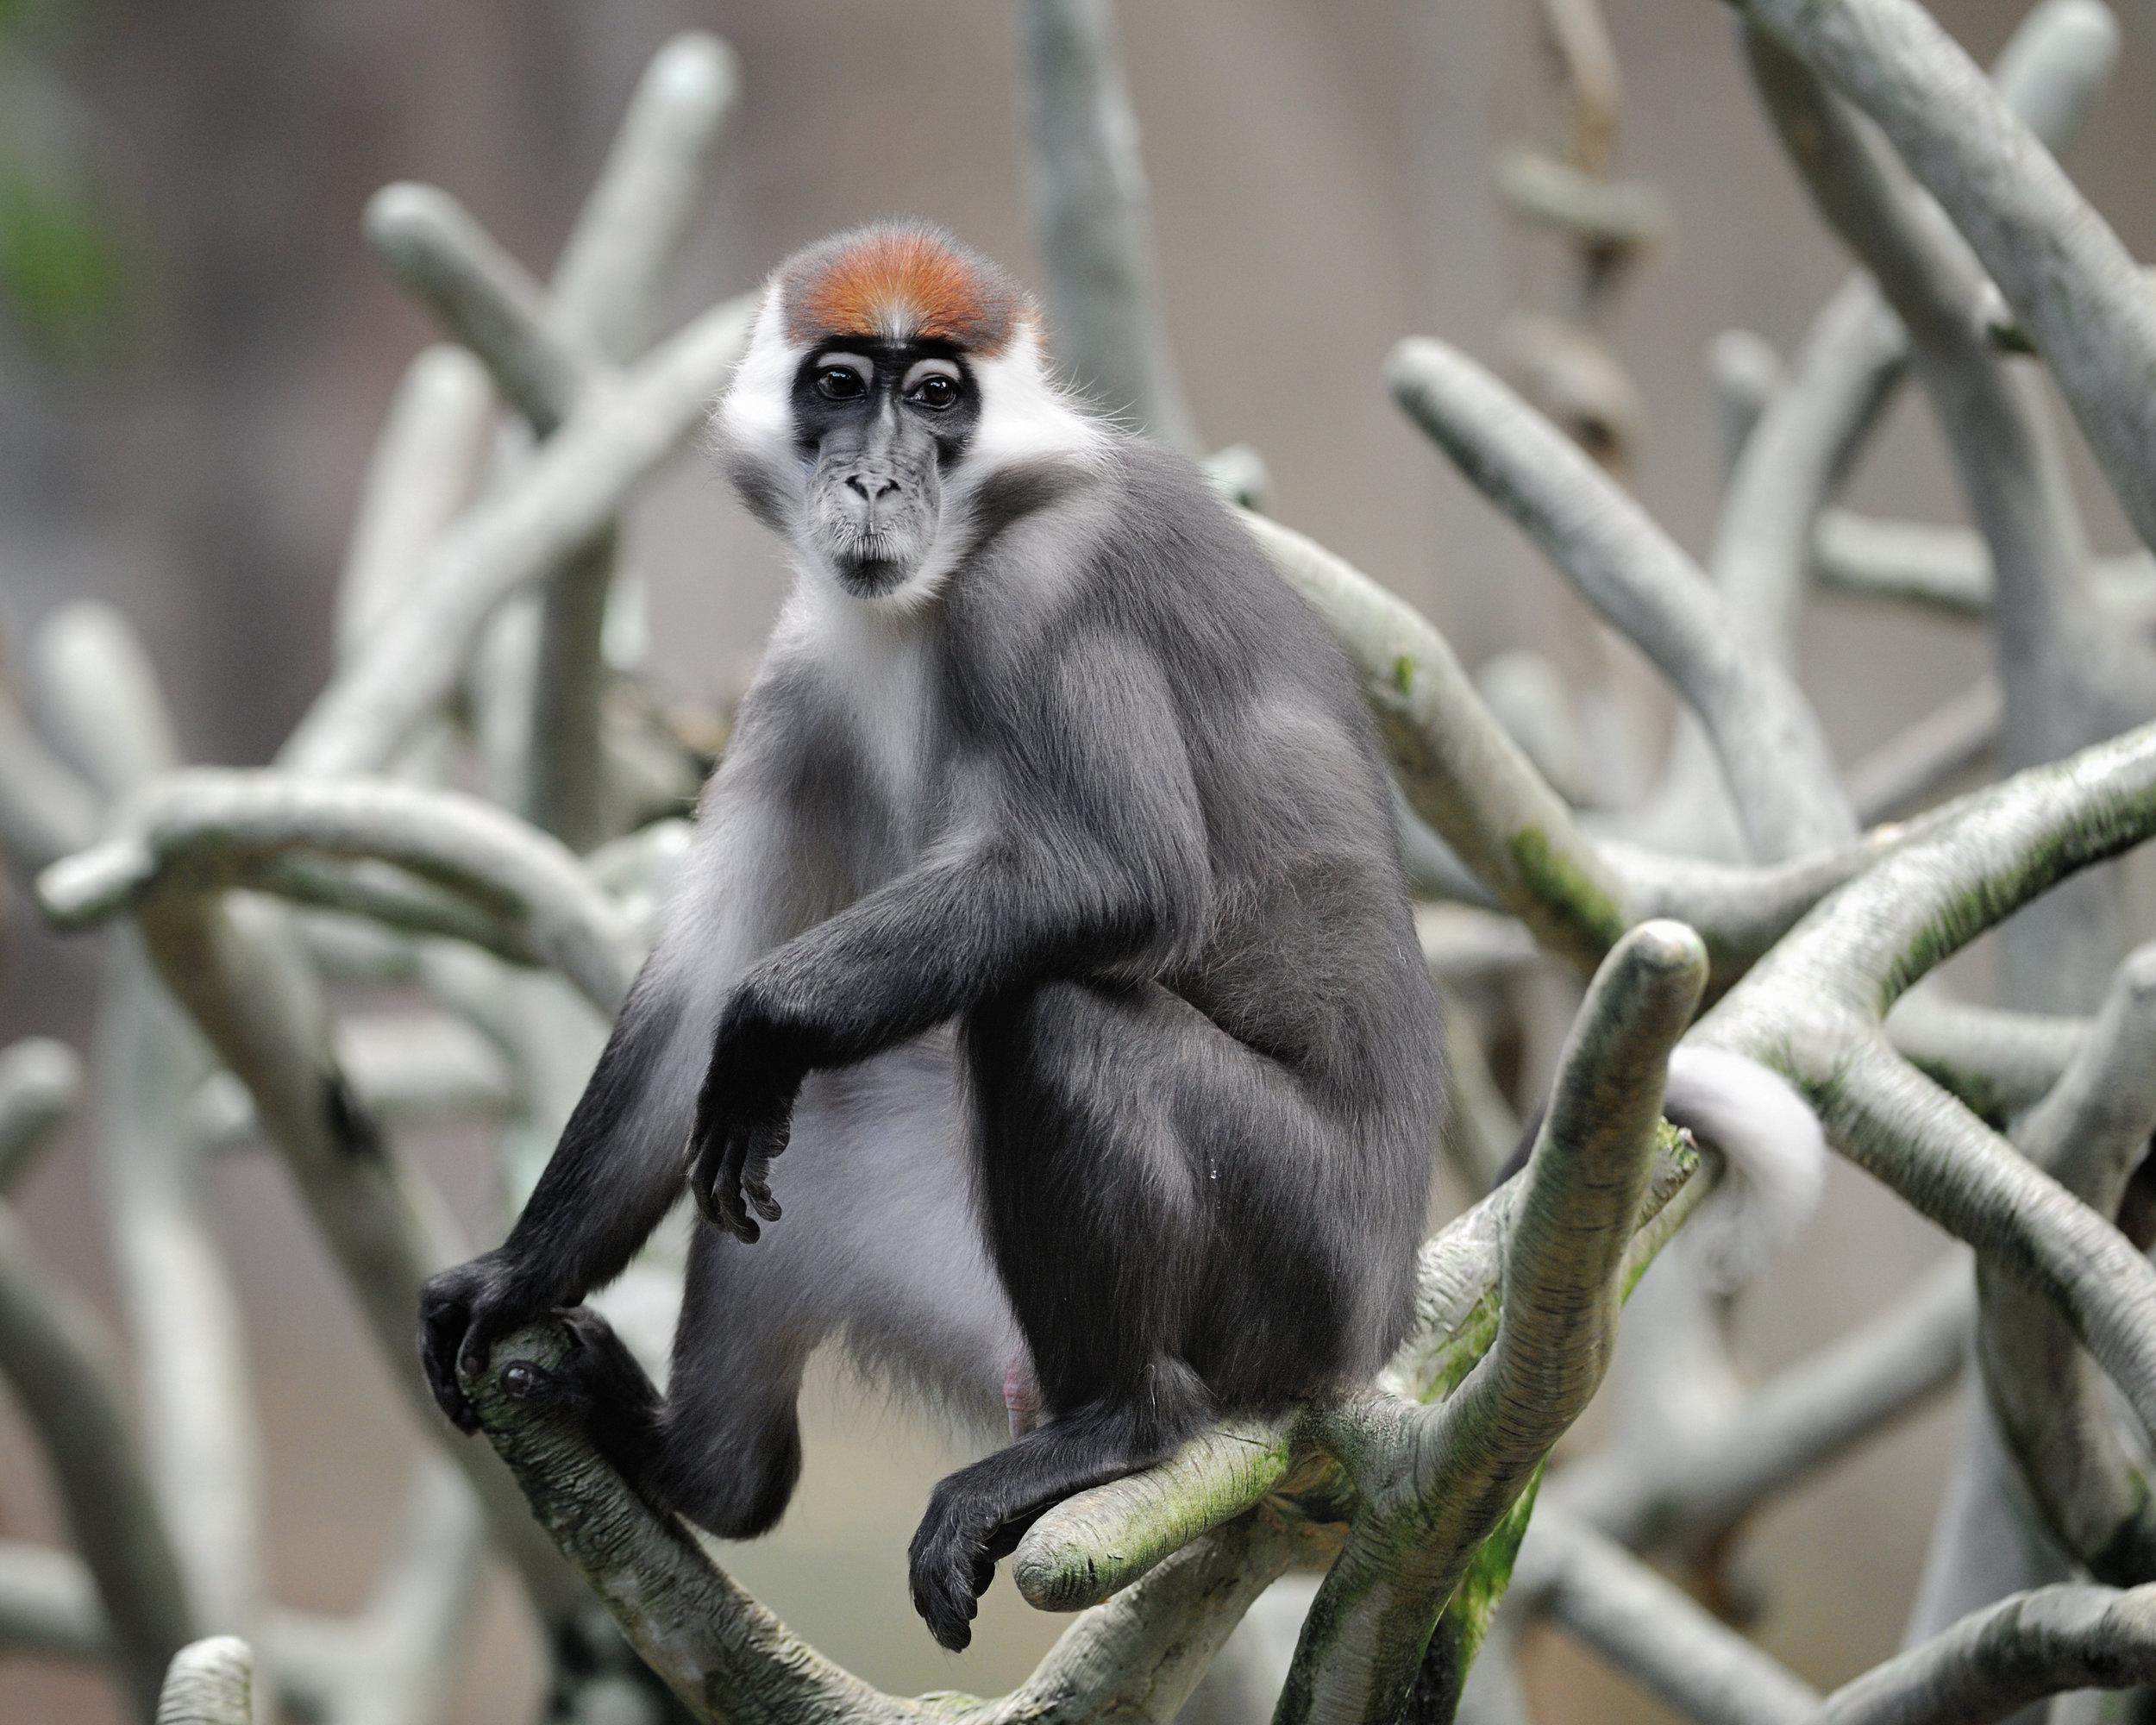 PICTURED: The red-capped mangabey (Cercocebus torquatus)